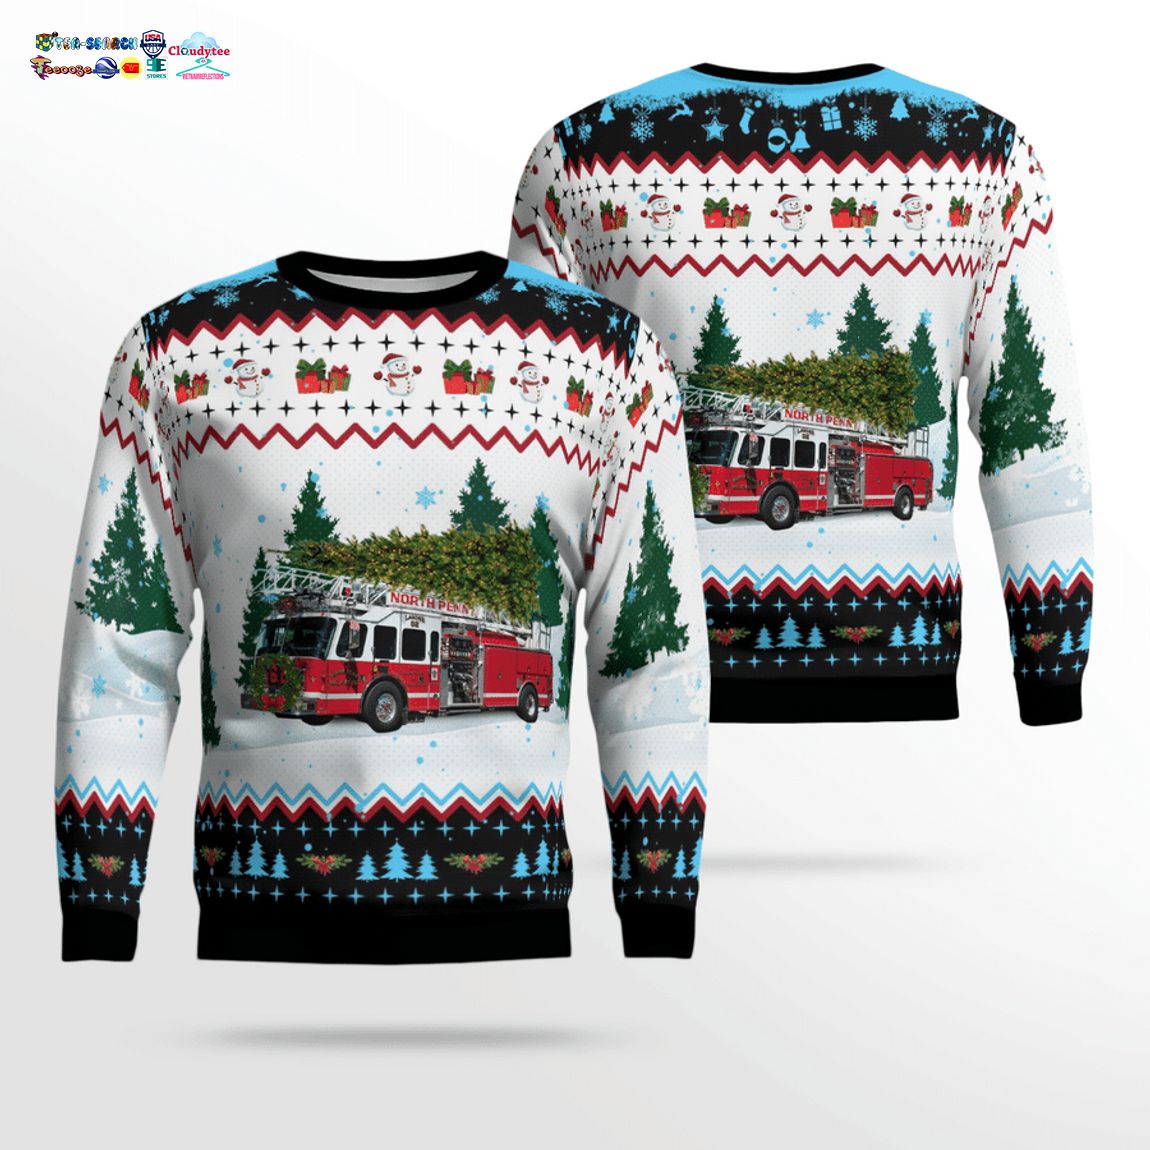 North Penn Volunteer Fire Company 3D Christmas Sweater - Stand easy bro